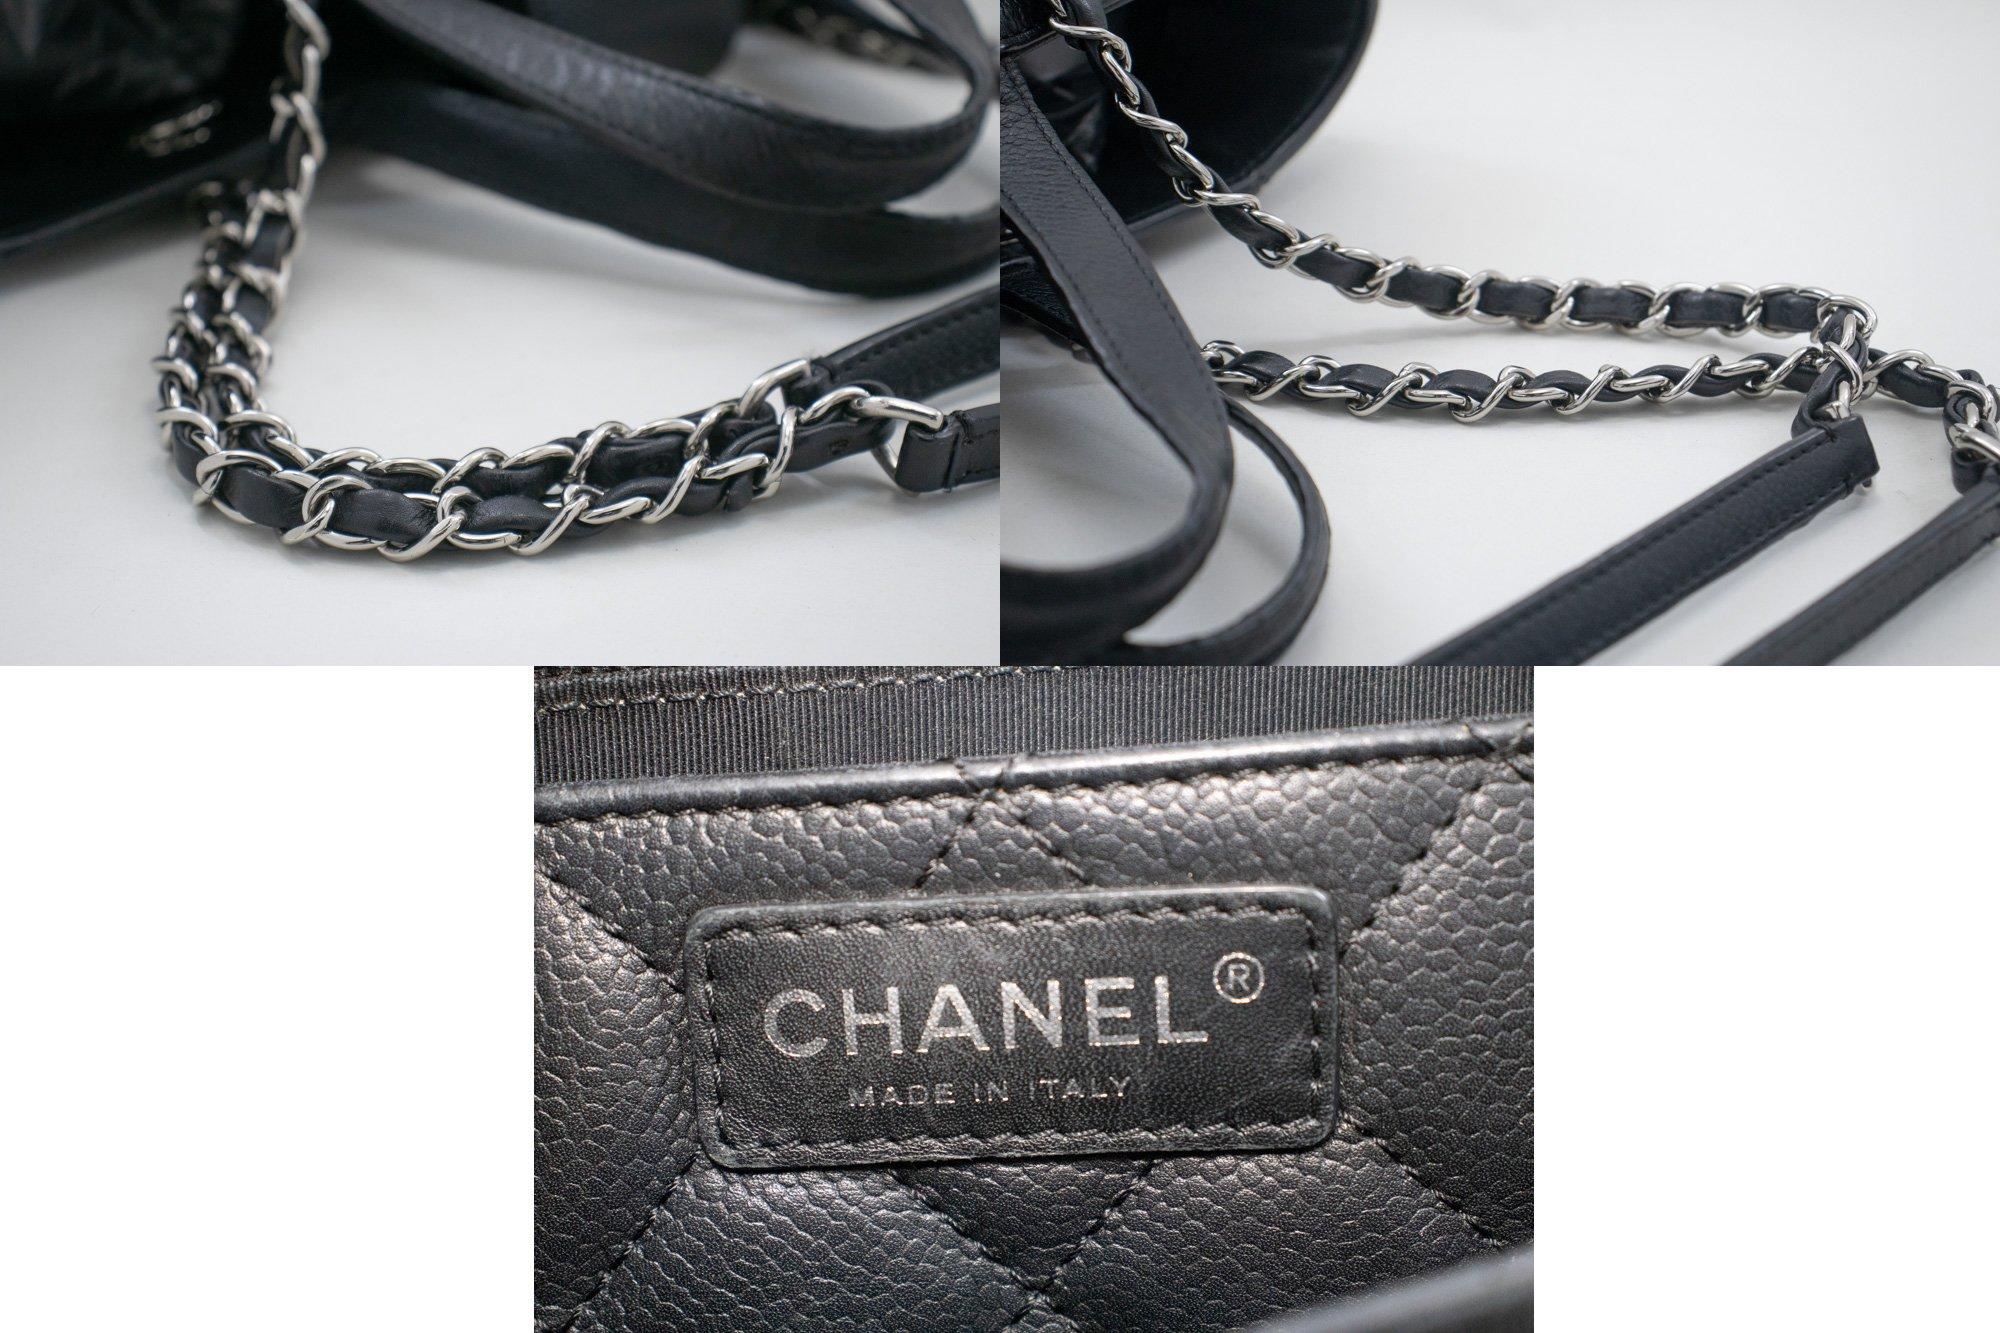 CHANEL 2 Way Chain Shoulder Bag Handbag Tote Black Caviar Quilted For Sale 4